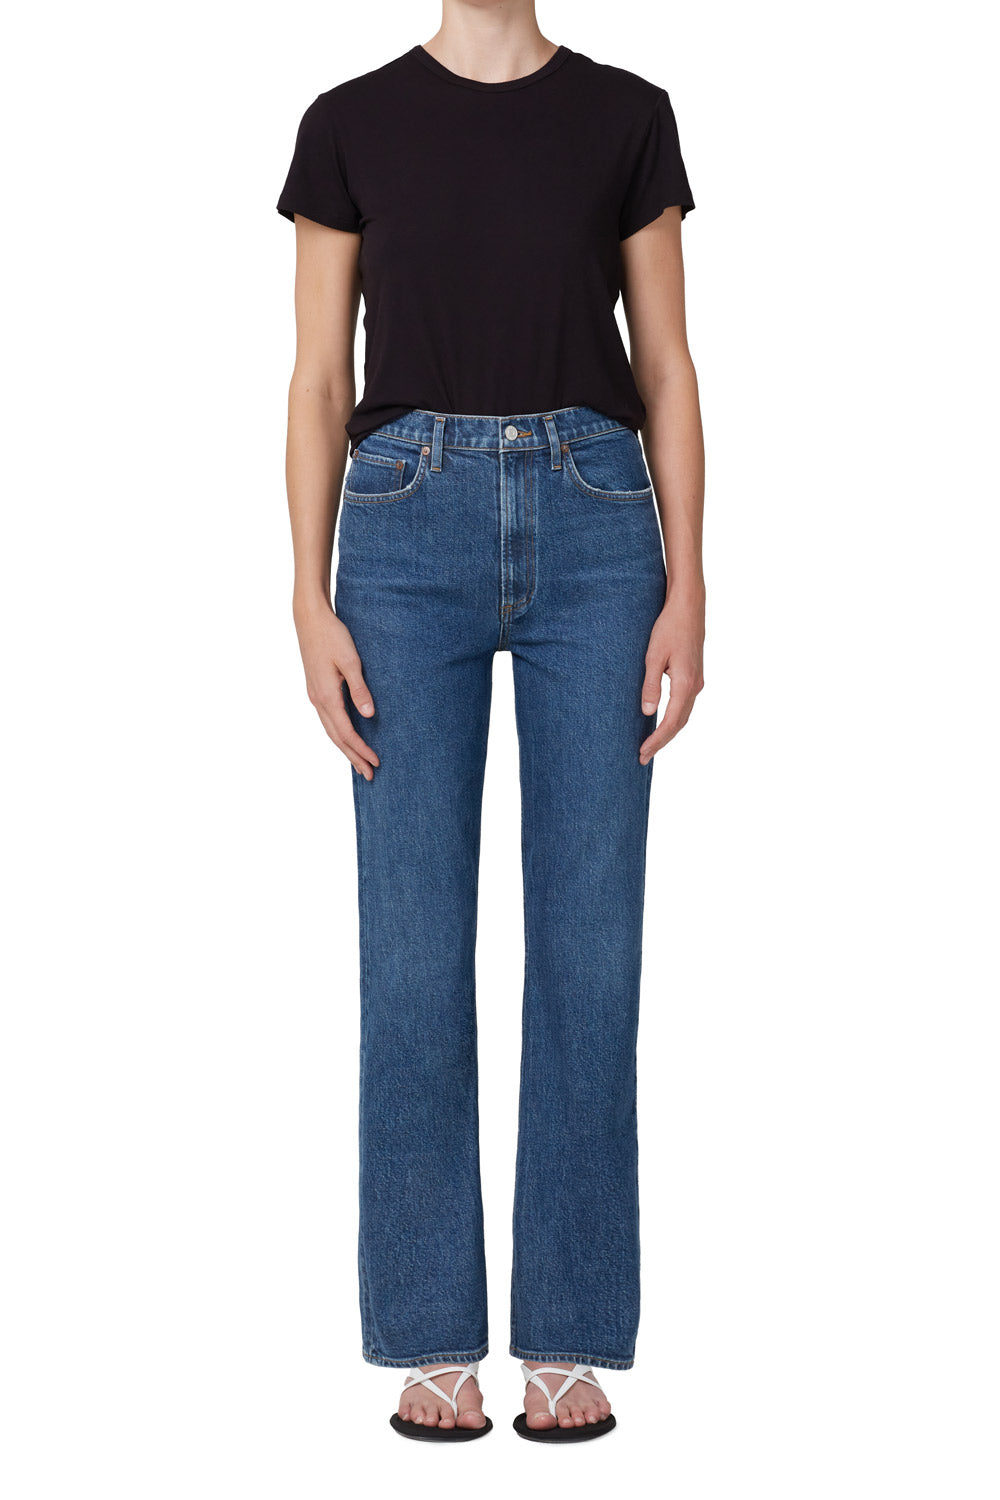 Agolde High Rise Vintage Boot Cut in Aspire